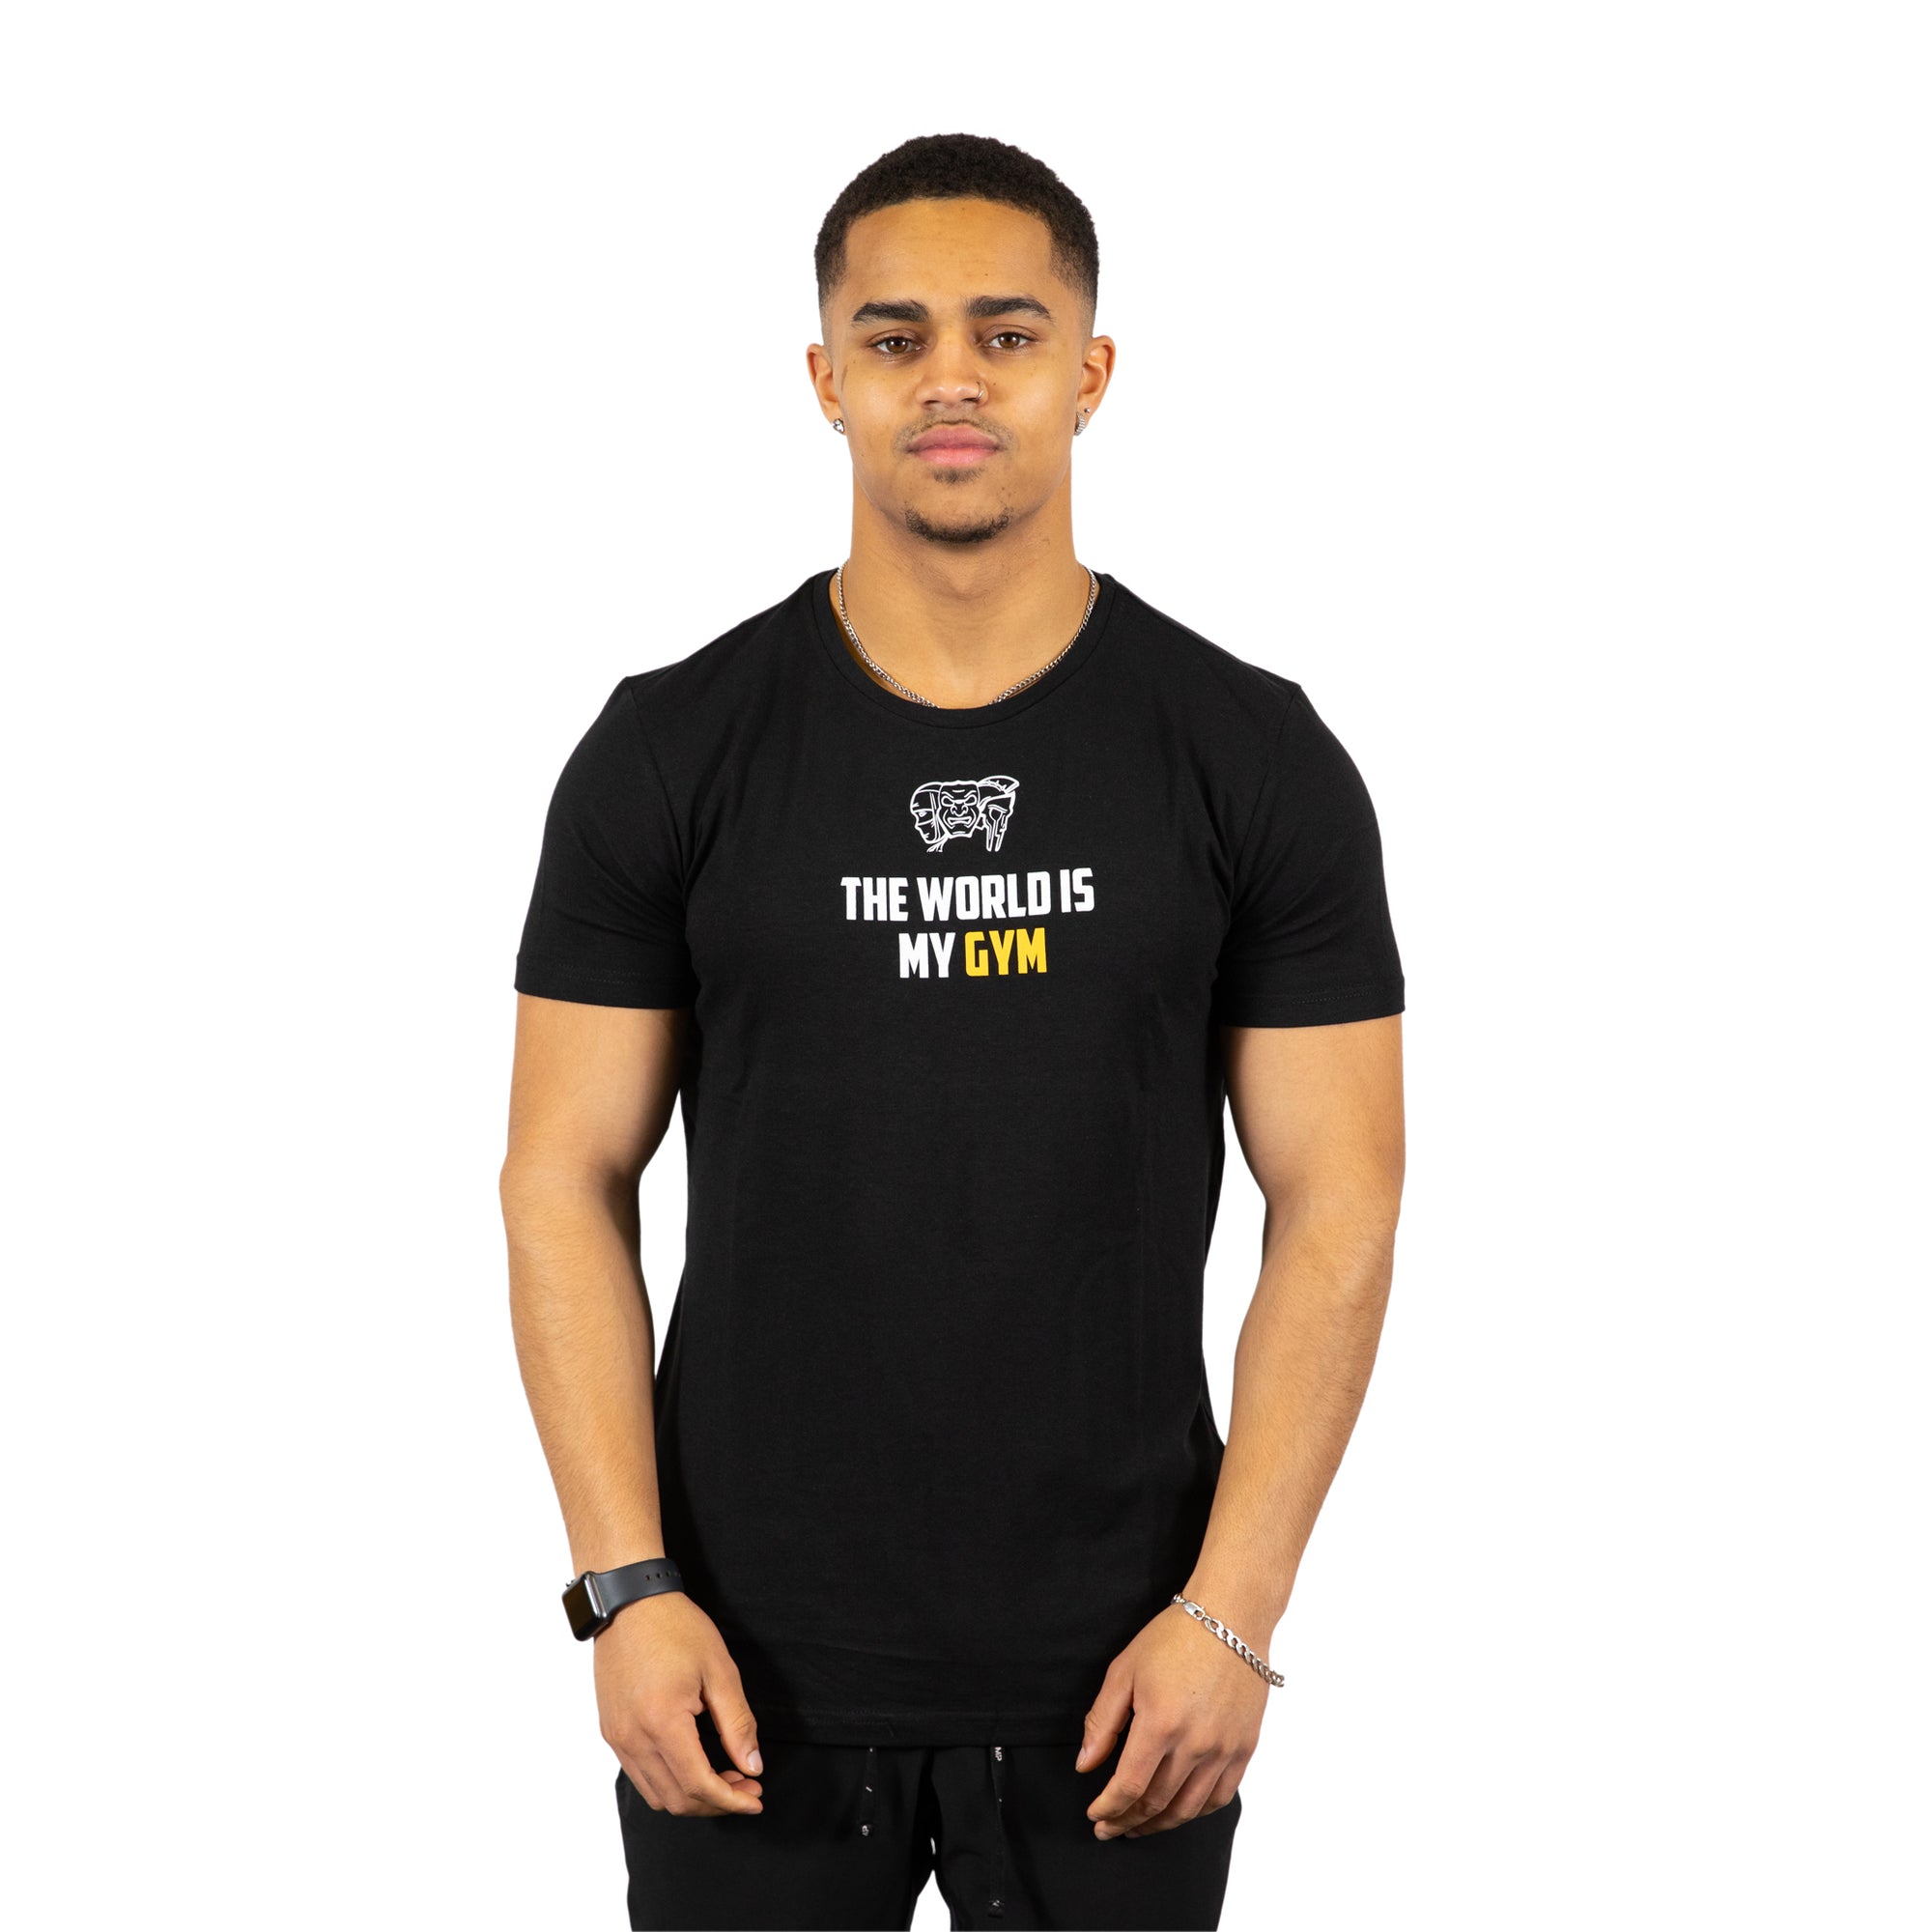 Gravity Fitness "The World is my Gym" Bamboo Training T Shirt